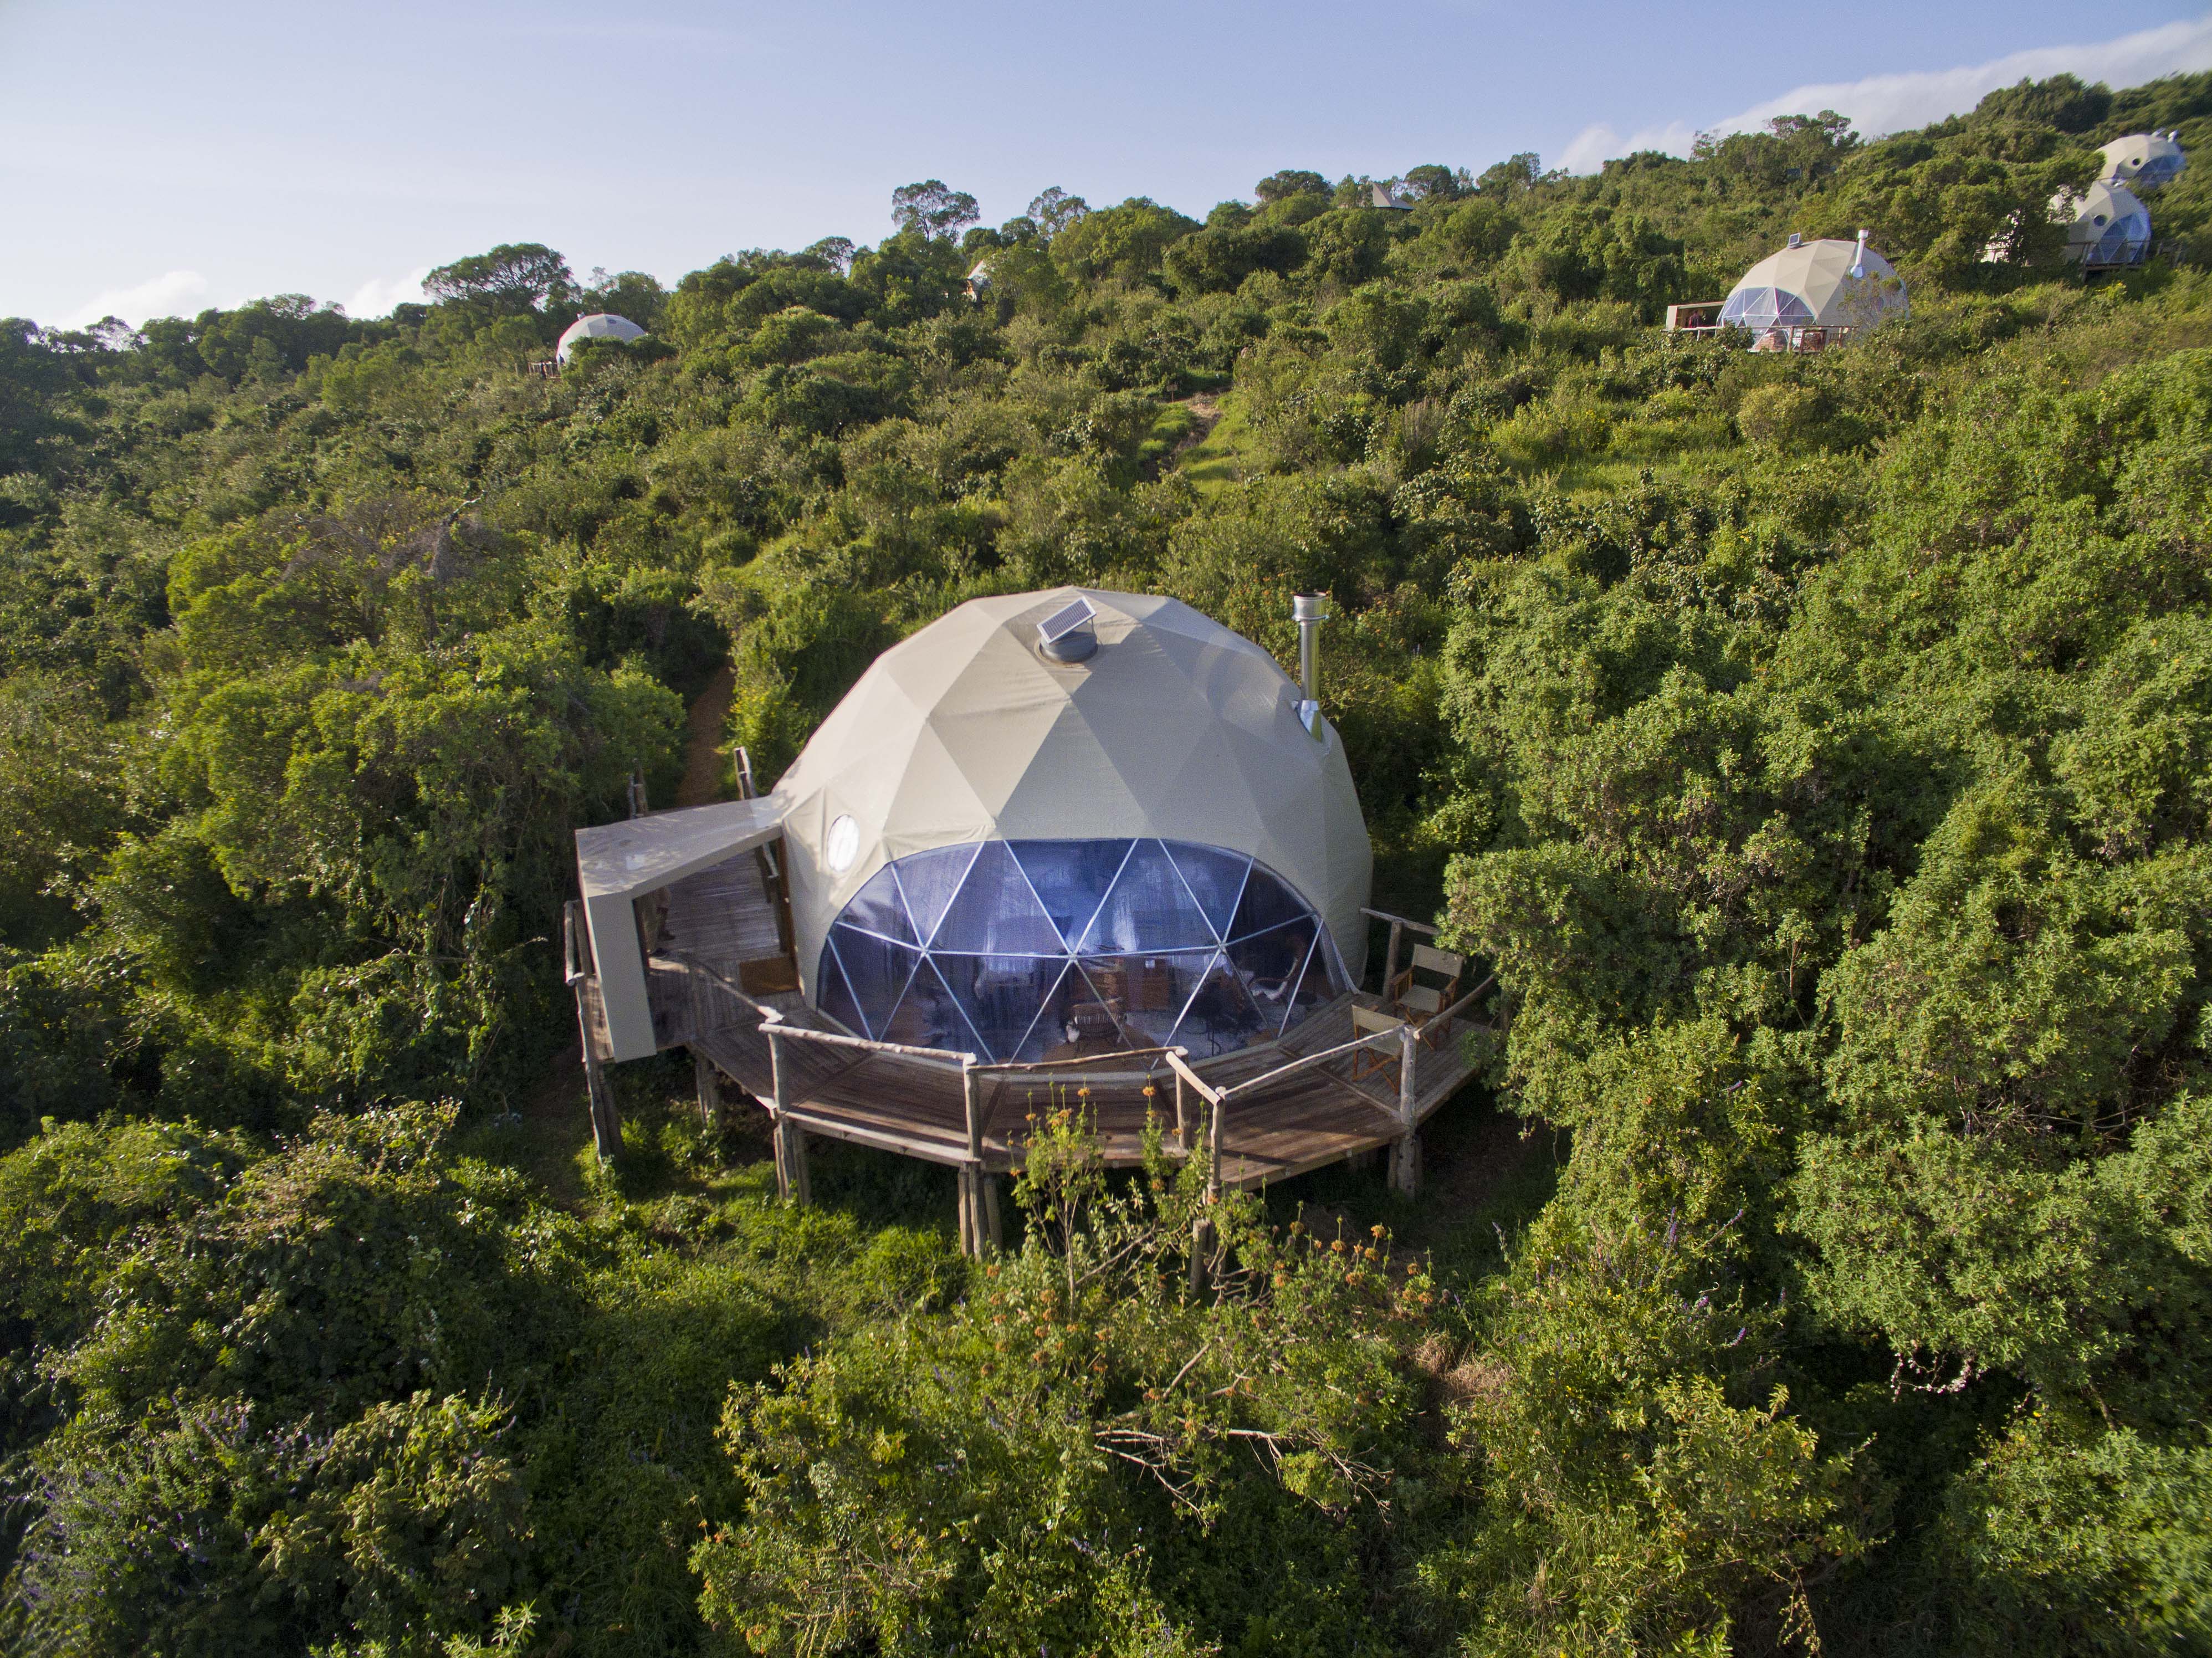 An aerial view of The Highlands' domed suites seen tucked amongst the natural foliage